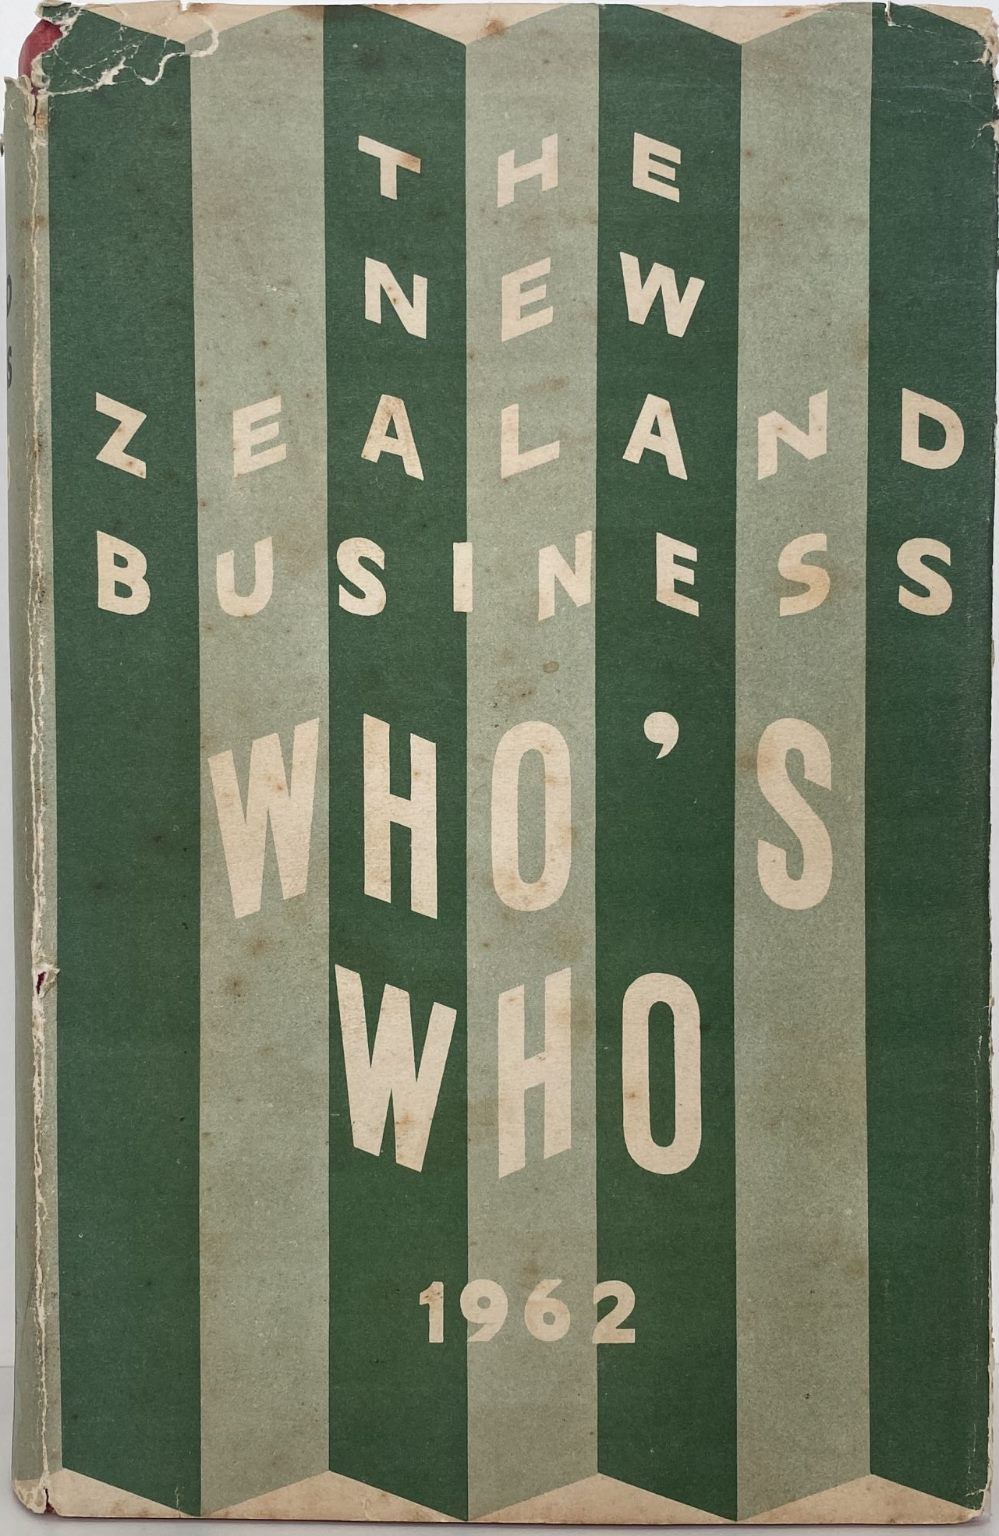 The New Zealand Business WHO'S WHO 1962